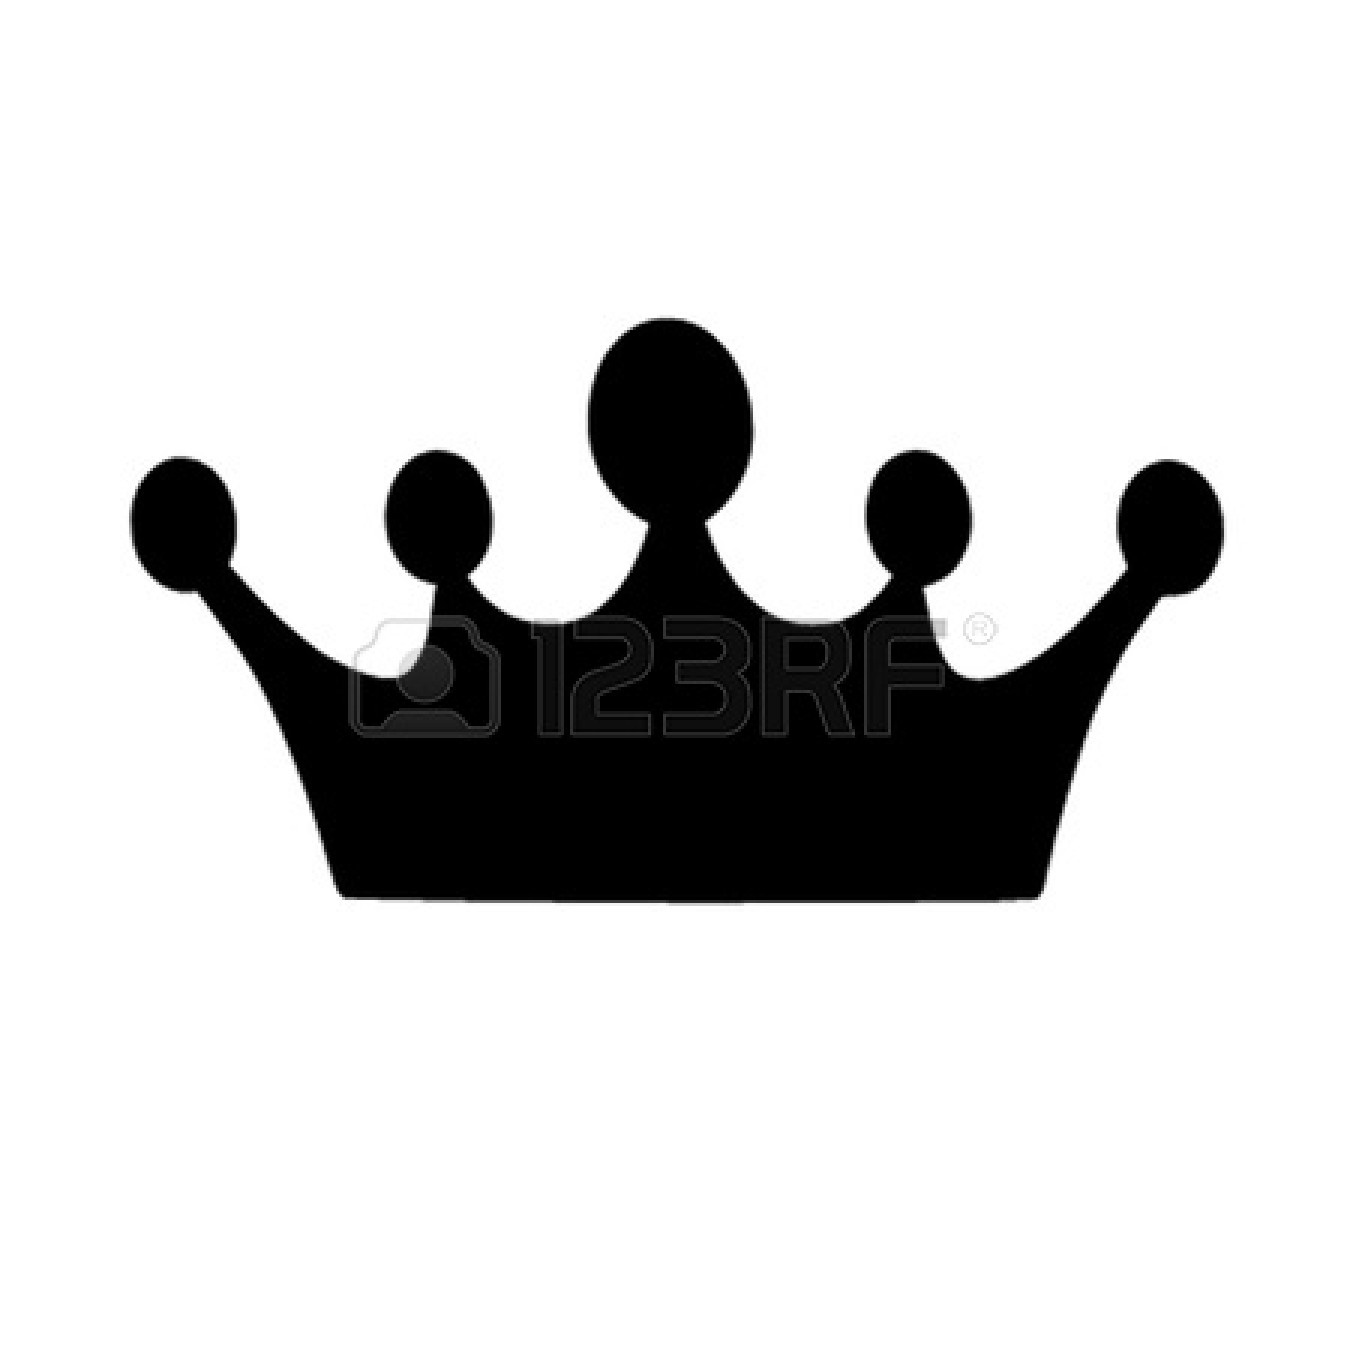 Prince Crown Clipart 